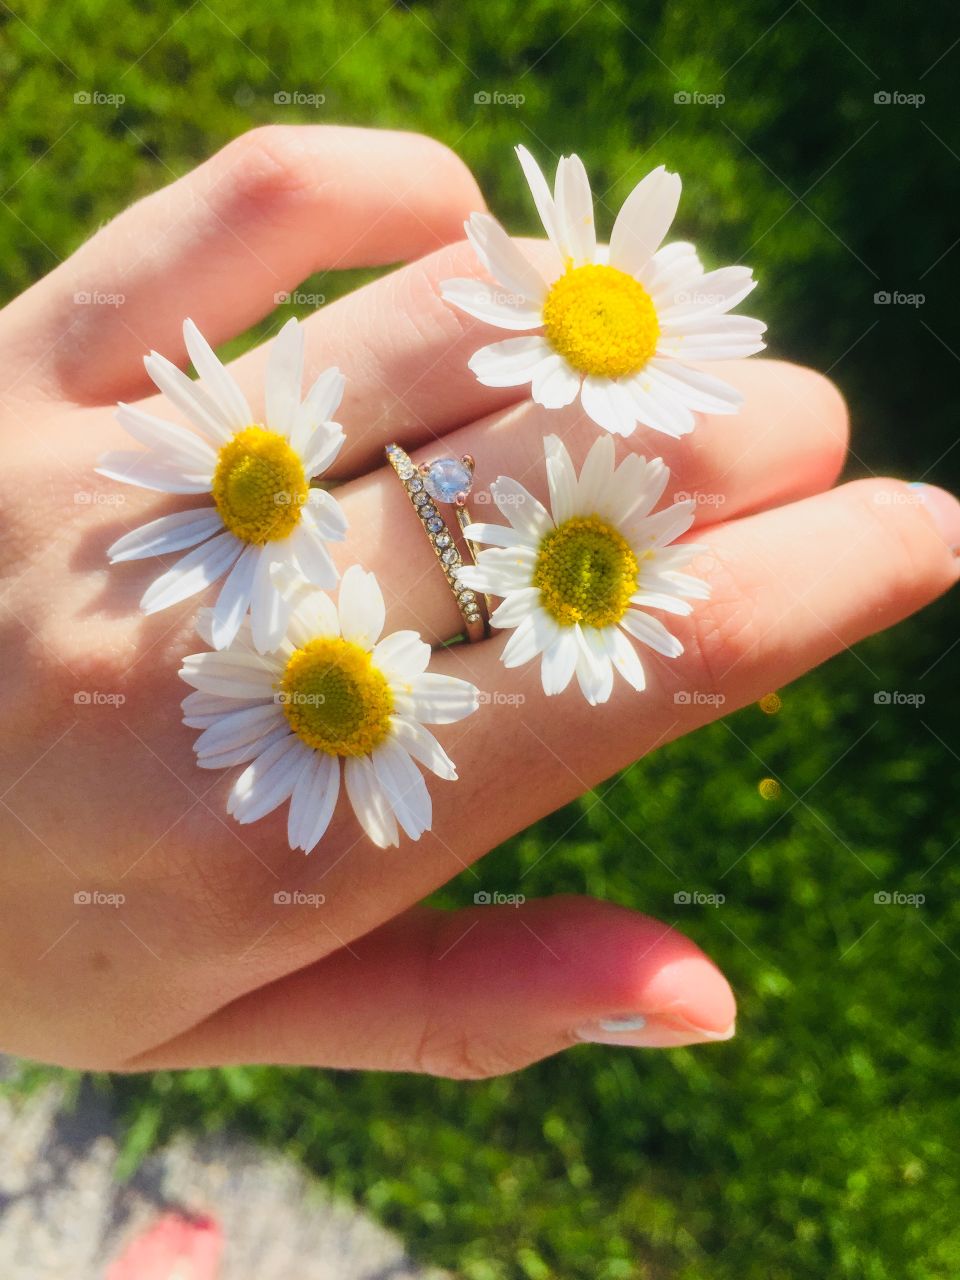 A hidden gem in all the beauty of daisies 